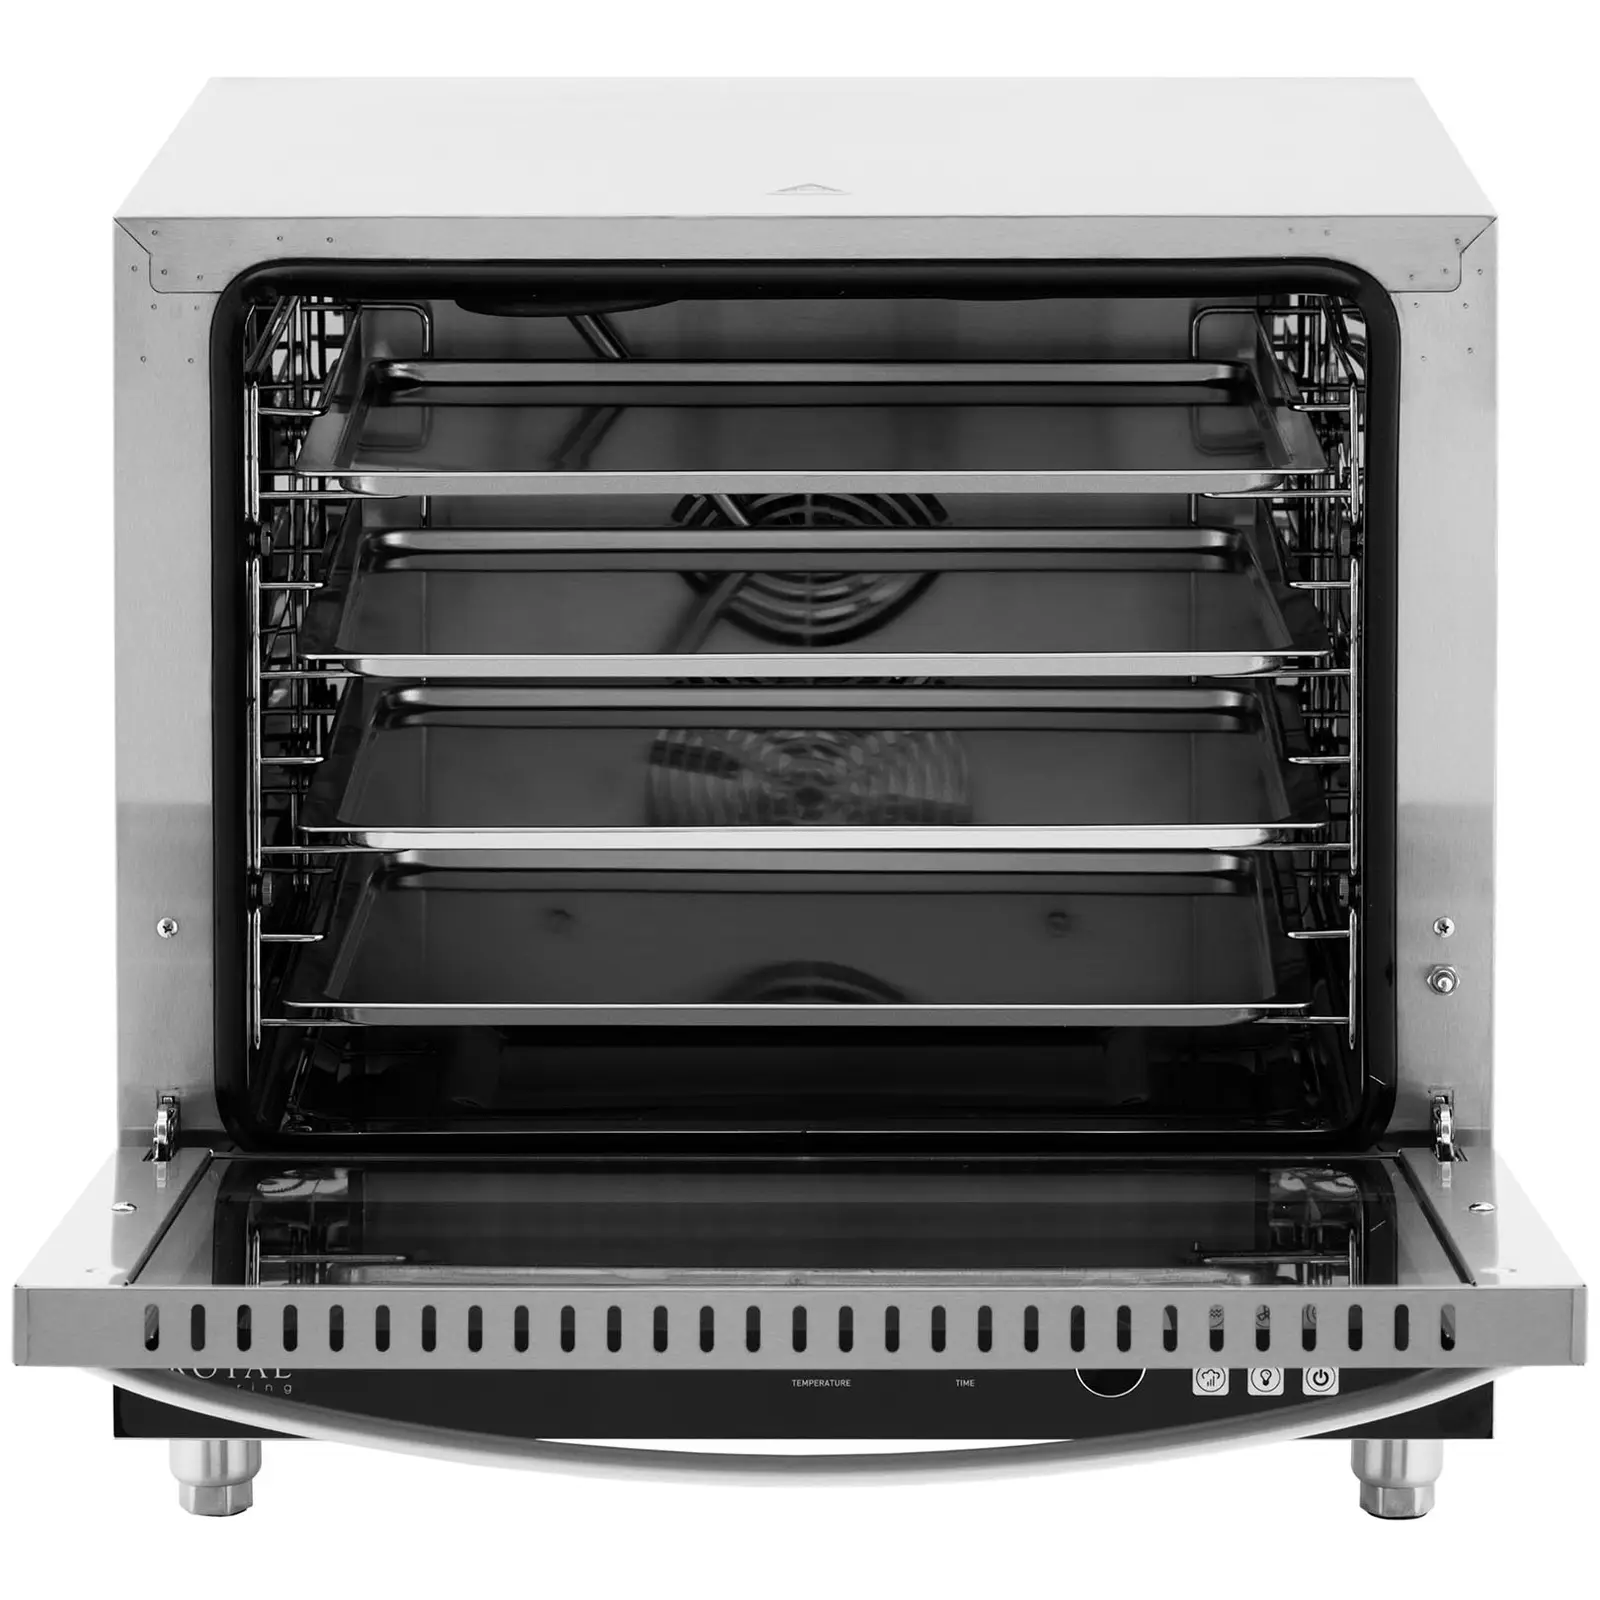 Hot air oven - 2800 W - Timer - 3 functions - 4 Trays - 4